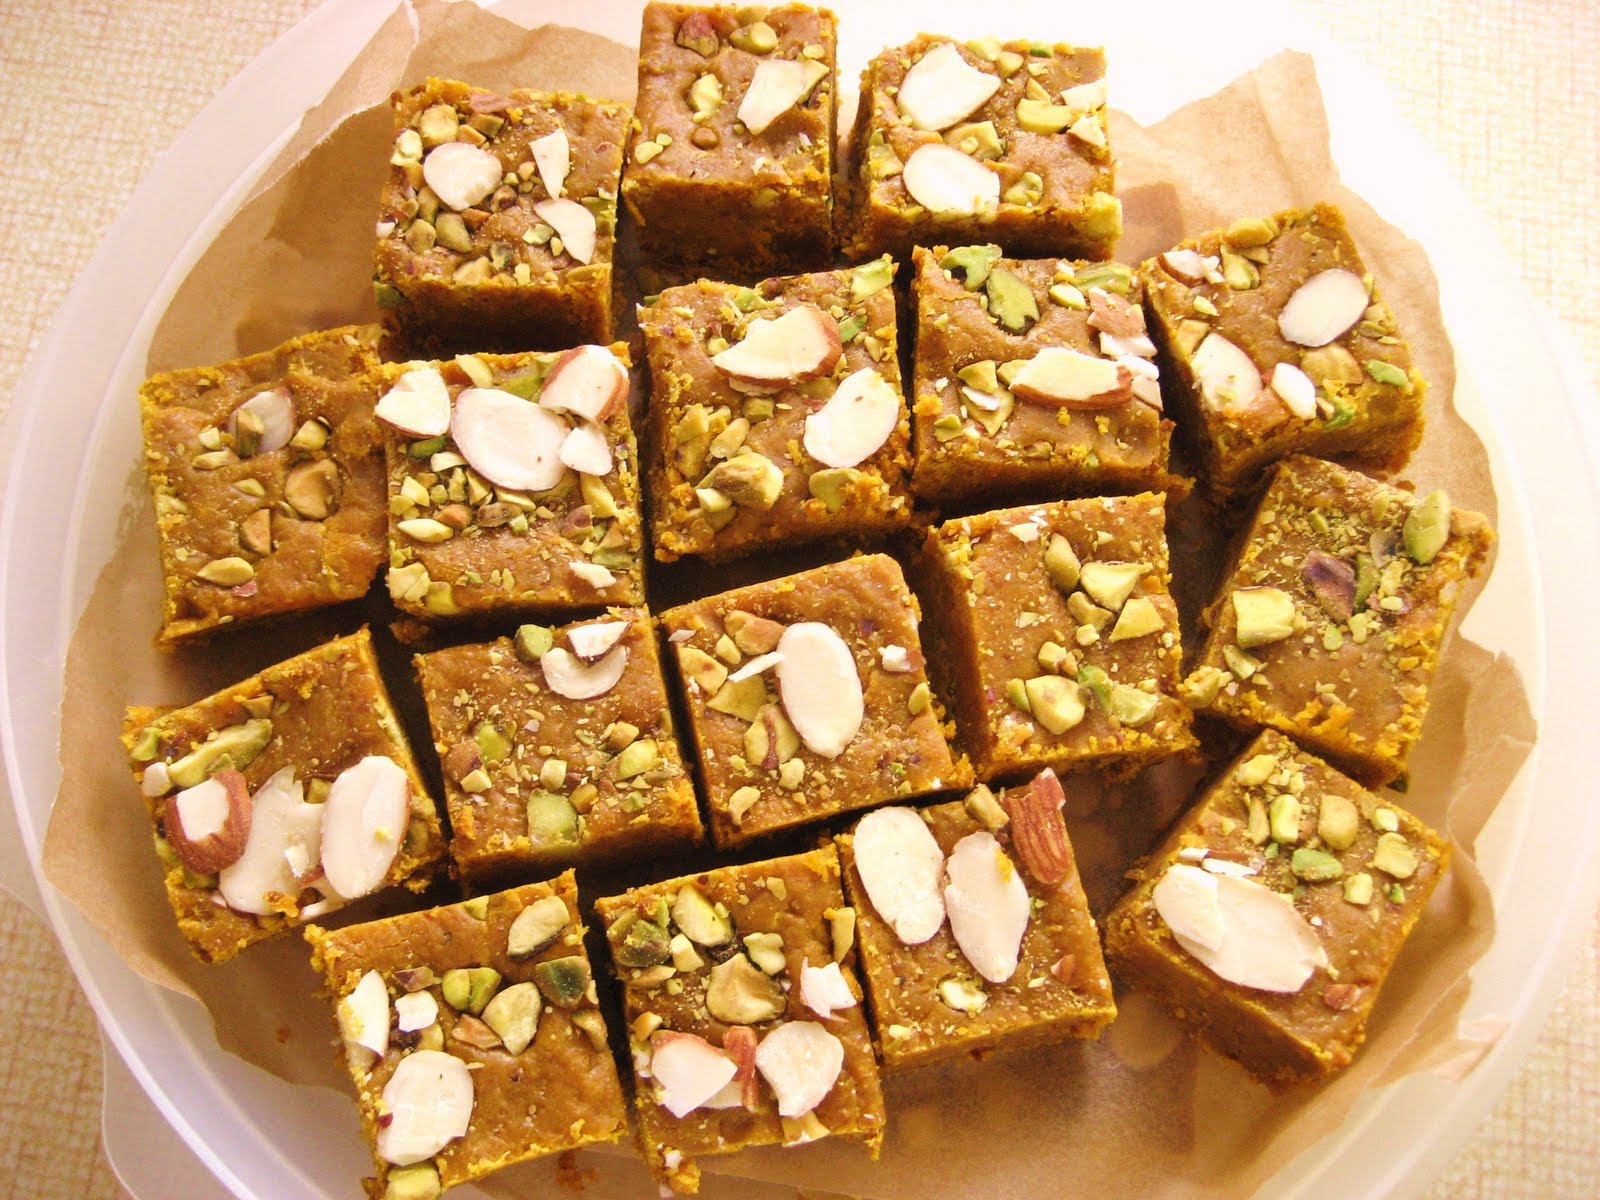 Read more about Best Sweets of Rajkot